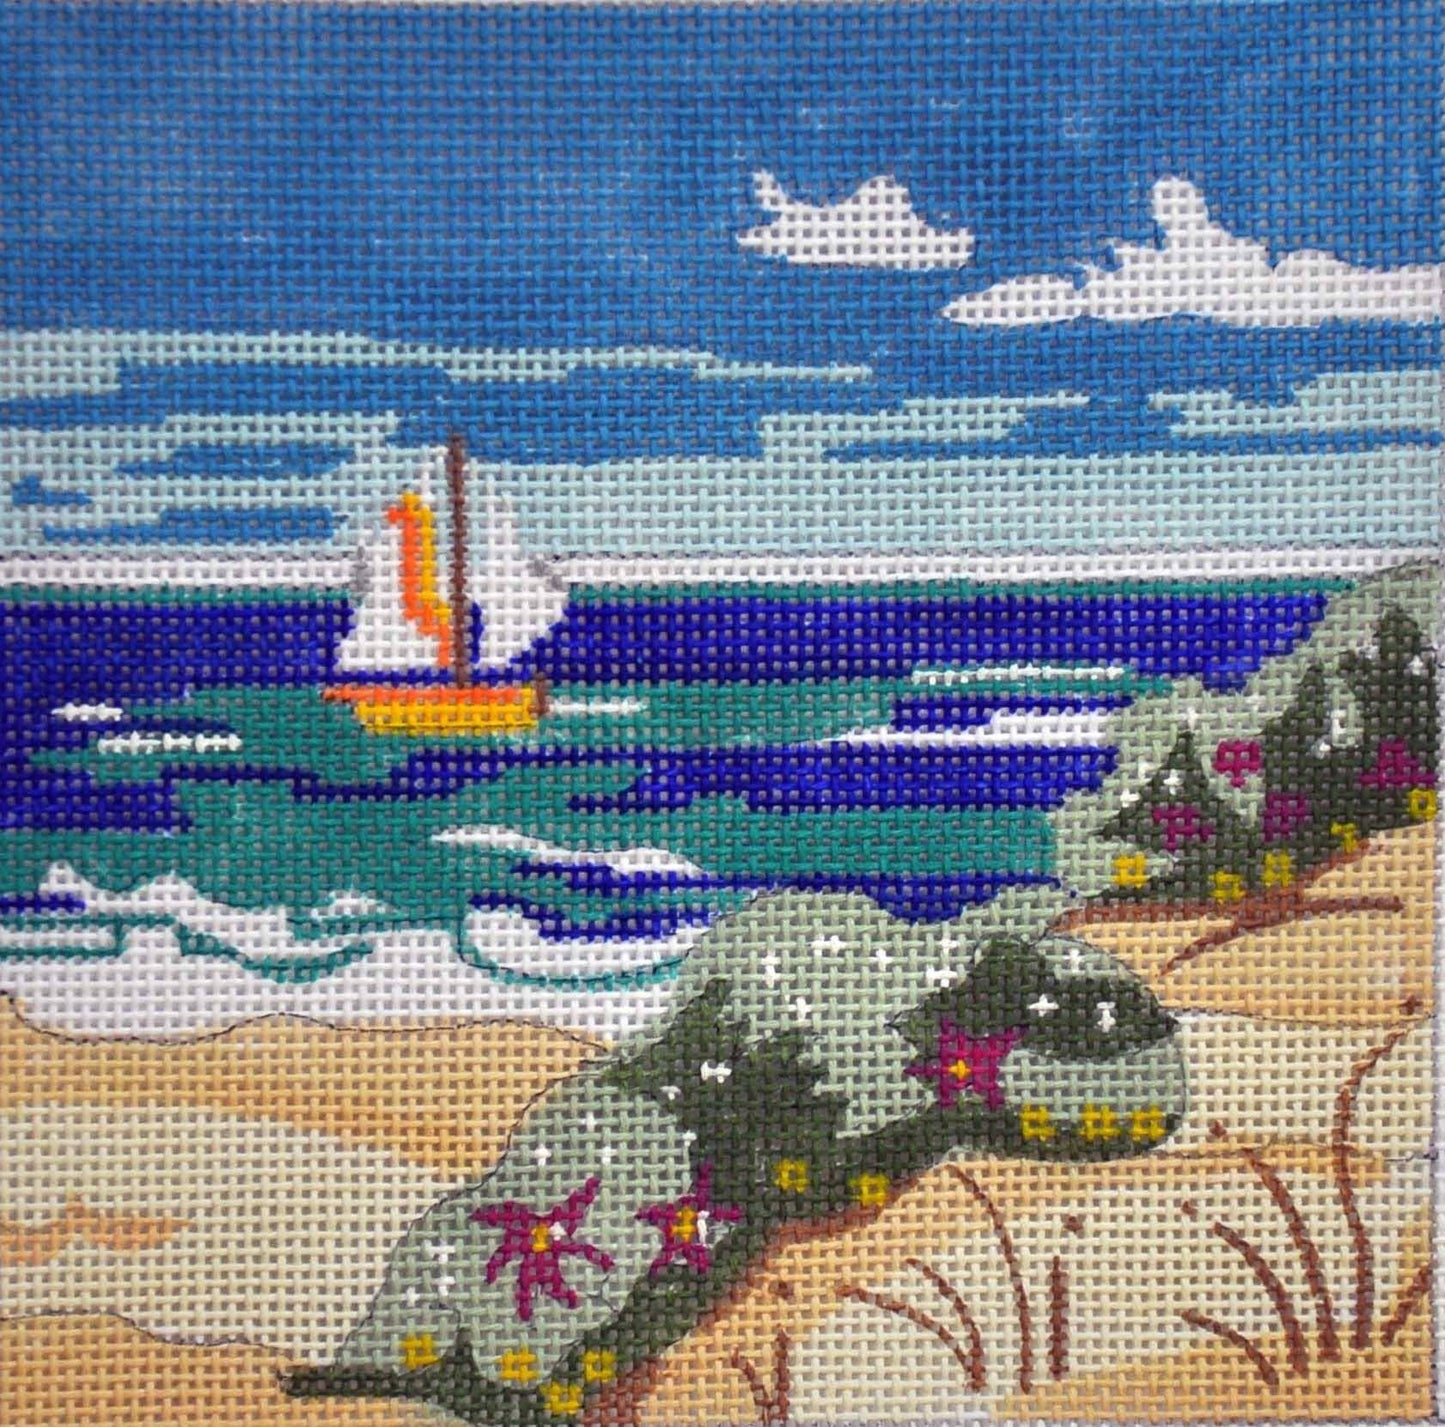 Sailboat at the Beach Painted Canvas Julie Mar Needlepoint Designs 